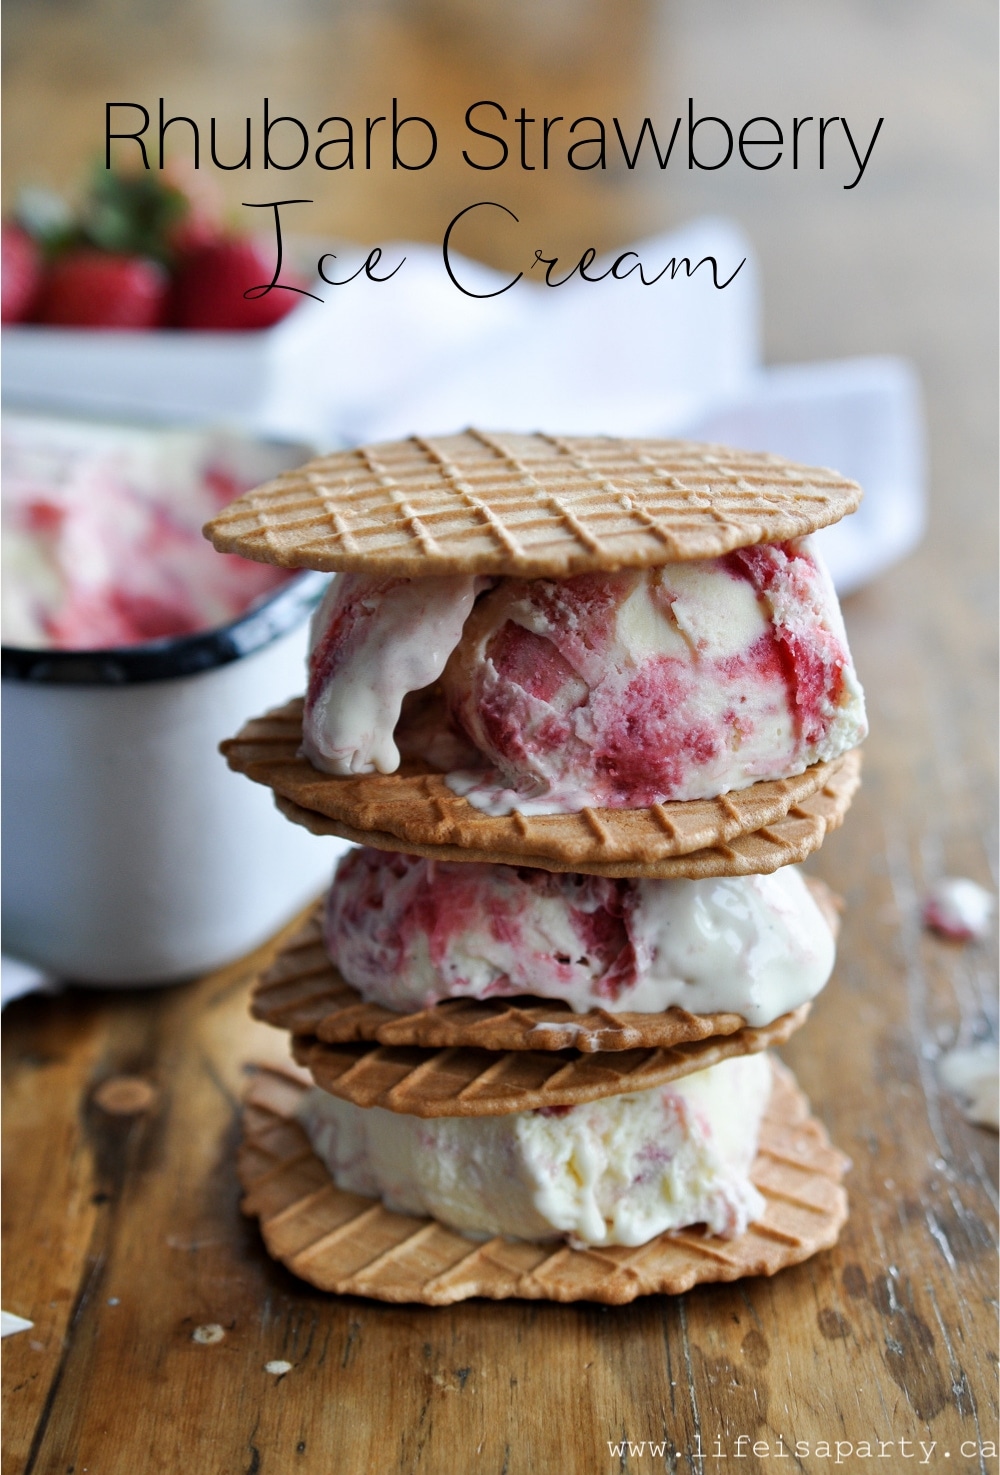 Strawberry Rhubarb Ice Cream Recipe - Life is a Party